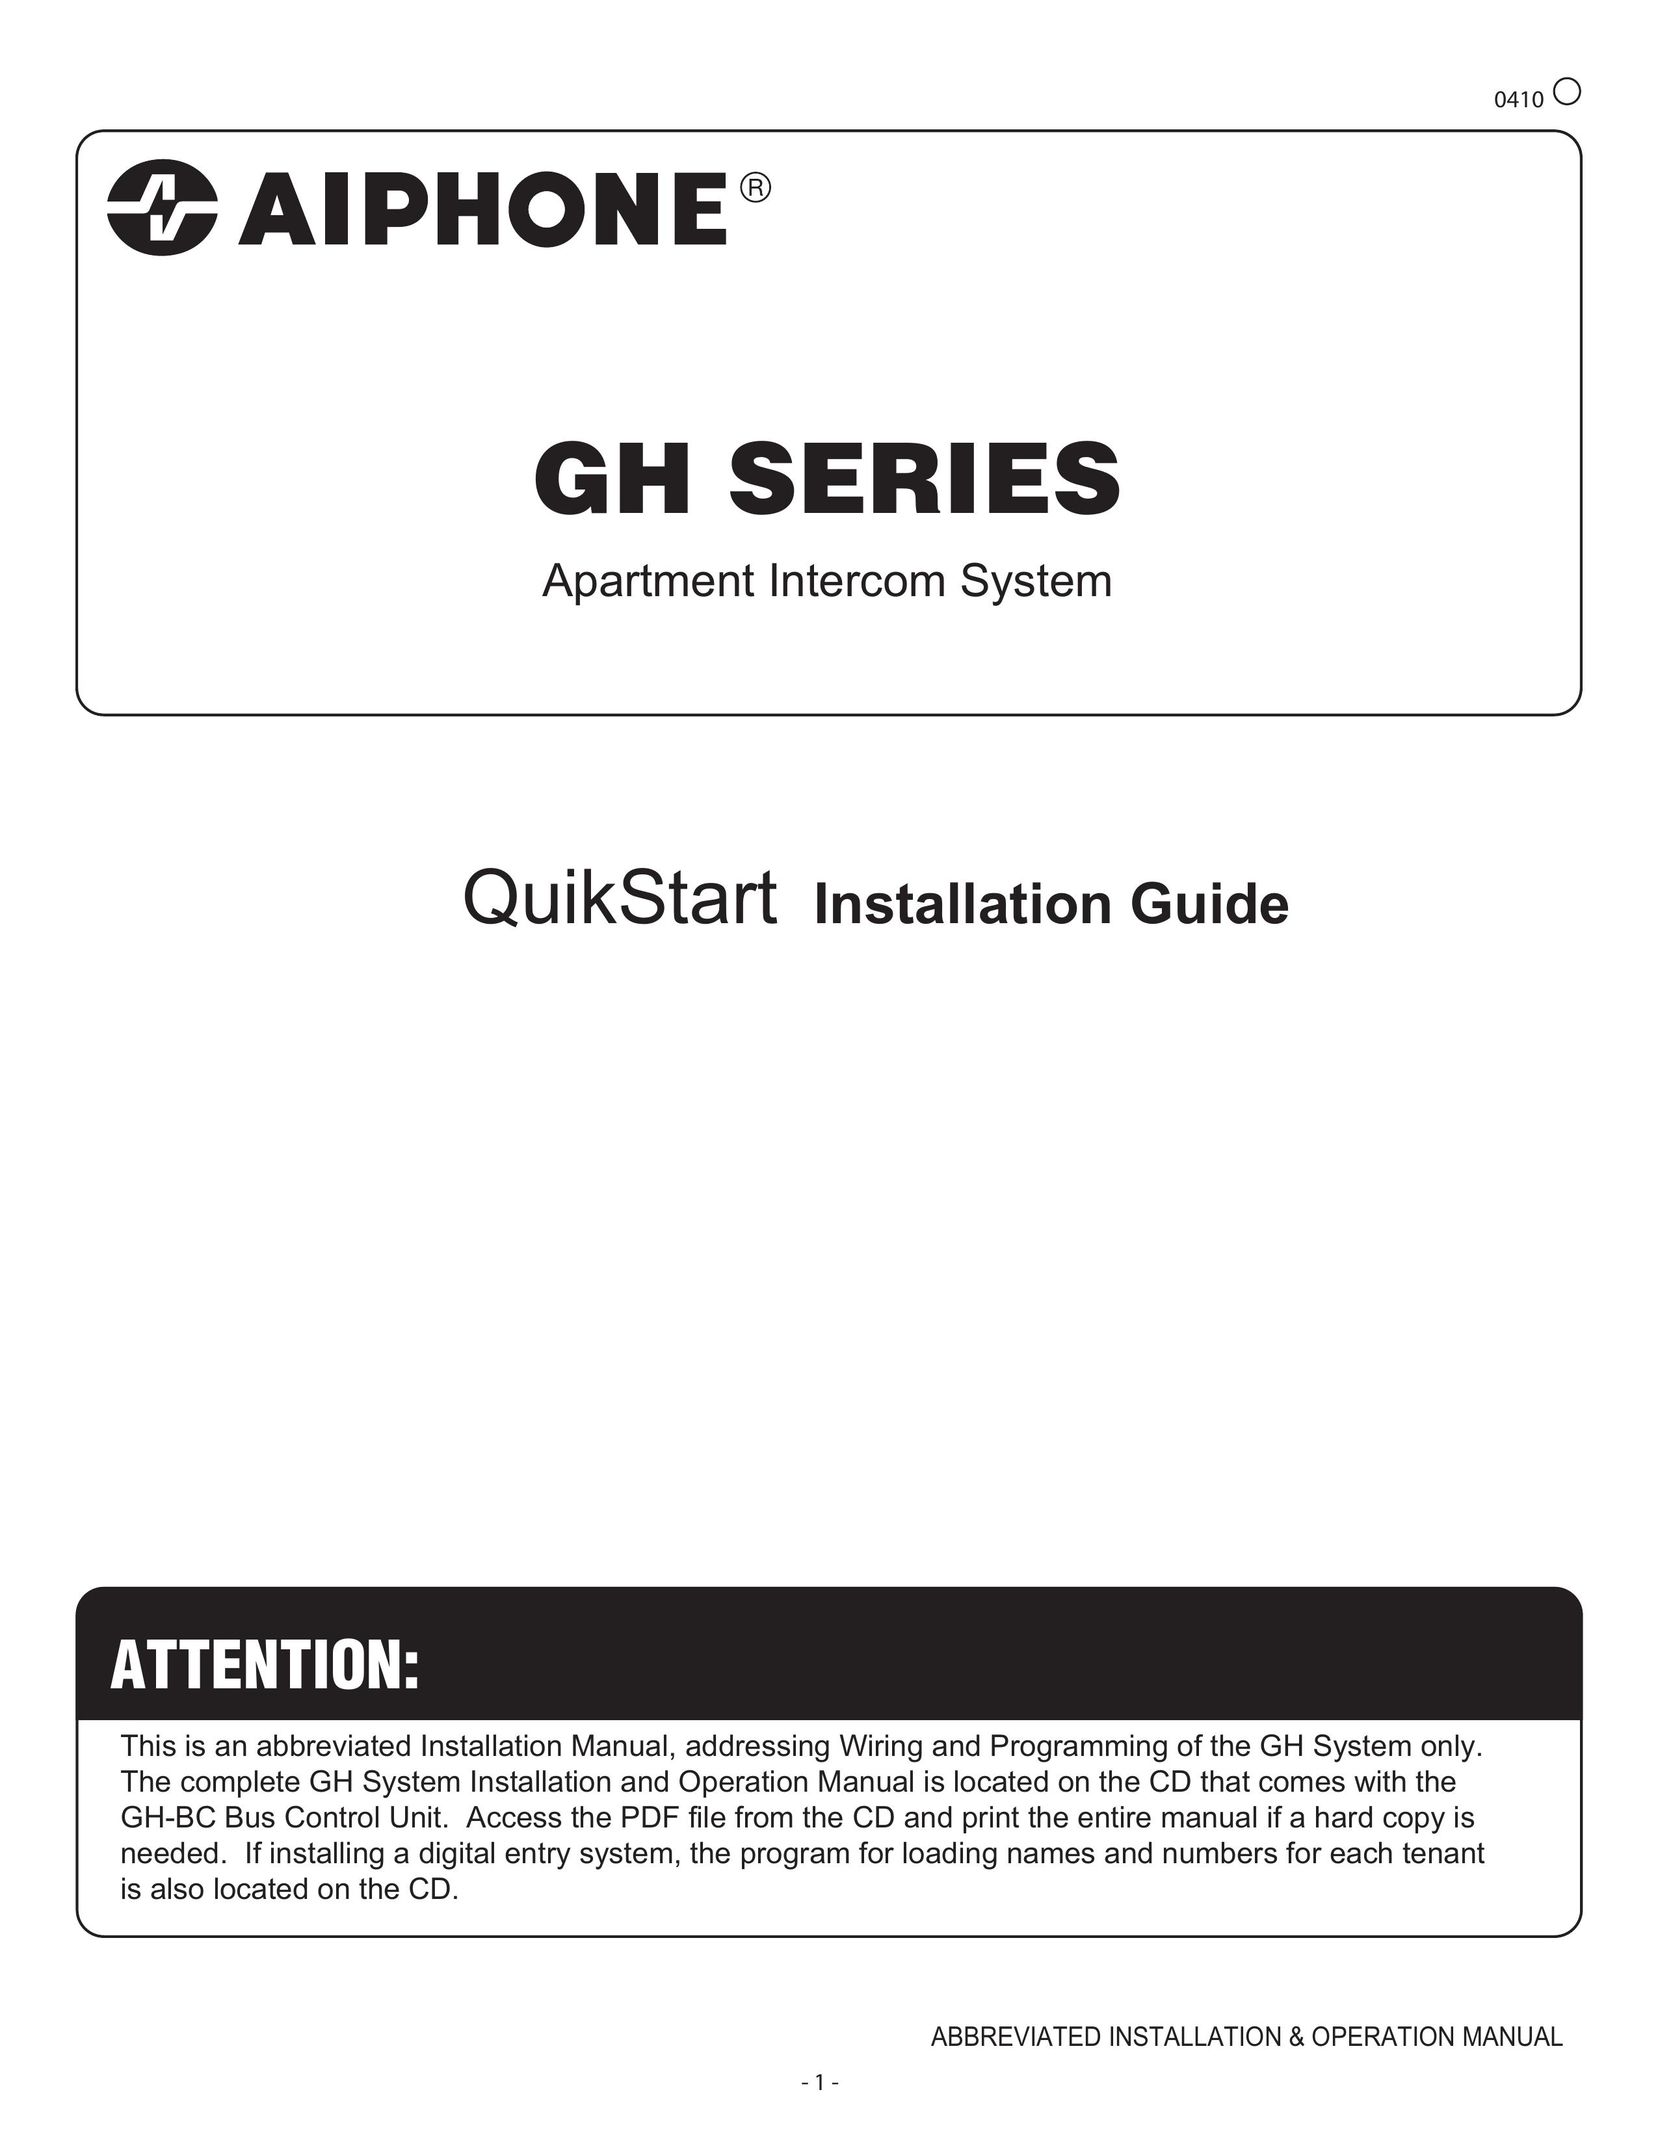 Aiphone 410 Intercom System User Manual (Page 1)